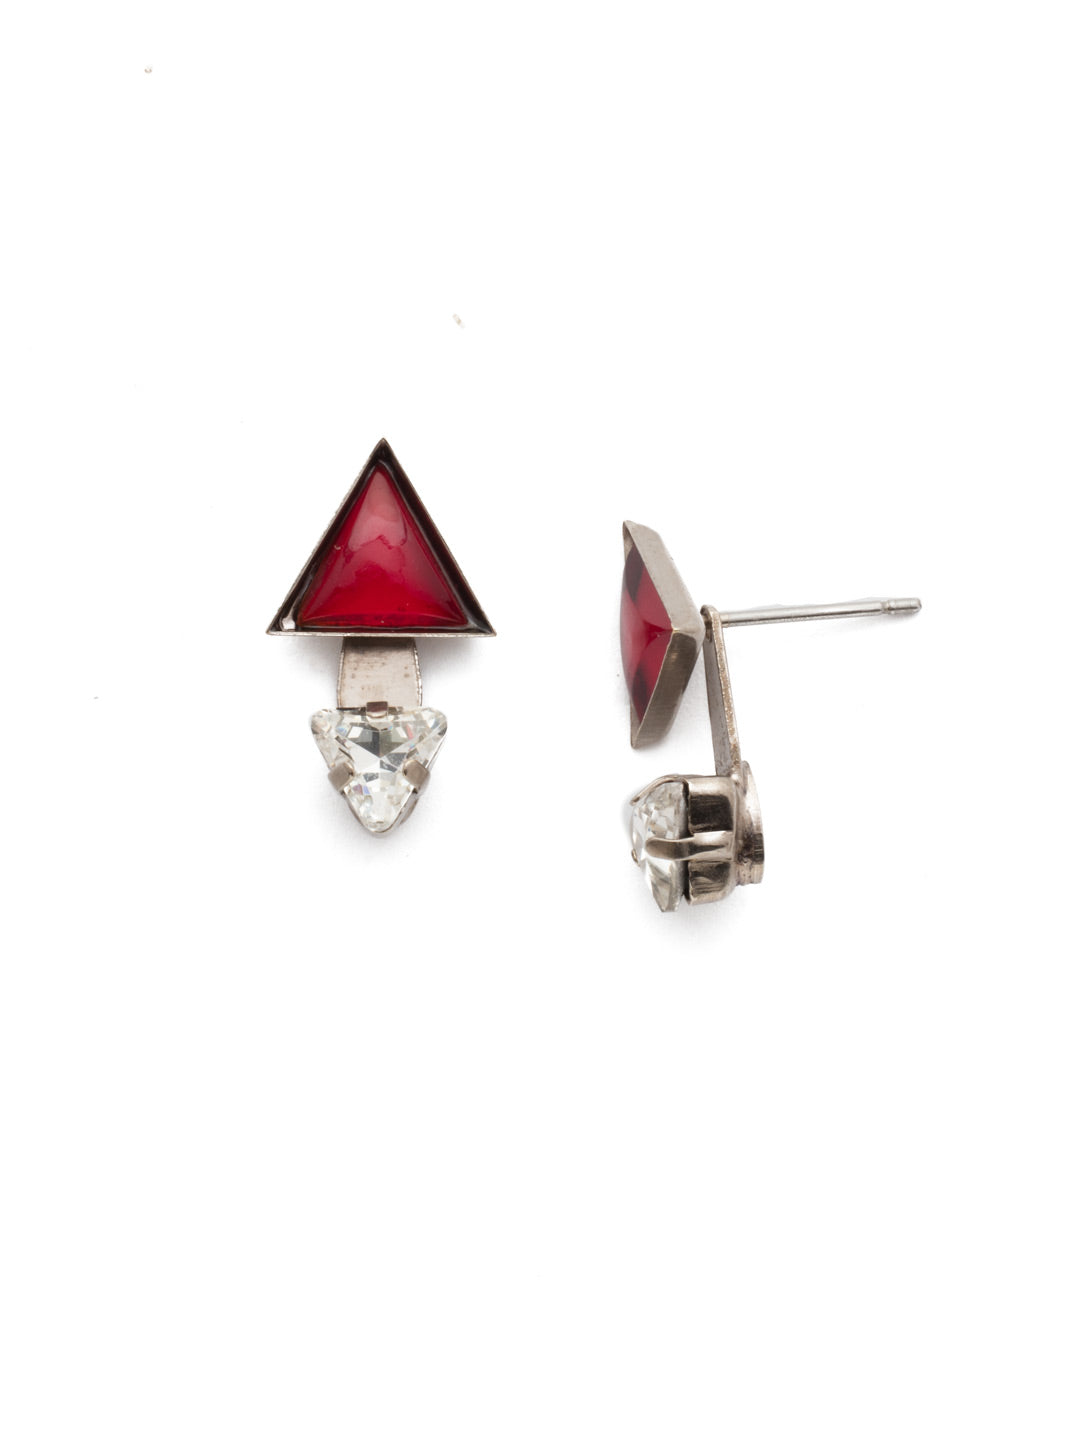 Emma Stud Earrings - EEN12ASGDAR - <p>The Emma Stud Earrings are just the pair when you're looking for a bit of unique, yet subtle, sparkle. Find it with the featured triangle crystals that come together for serious sparkle. From Sorrelli's Game Day Red collection in our Antique Silver-tone finish.</p>